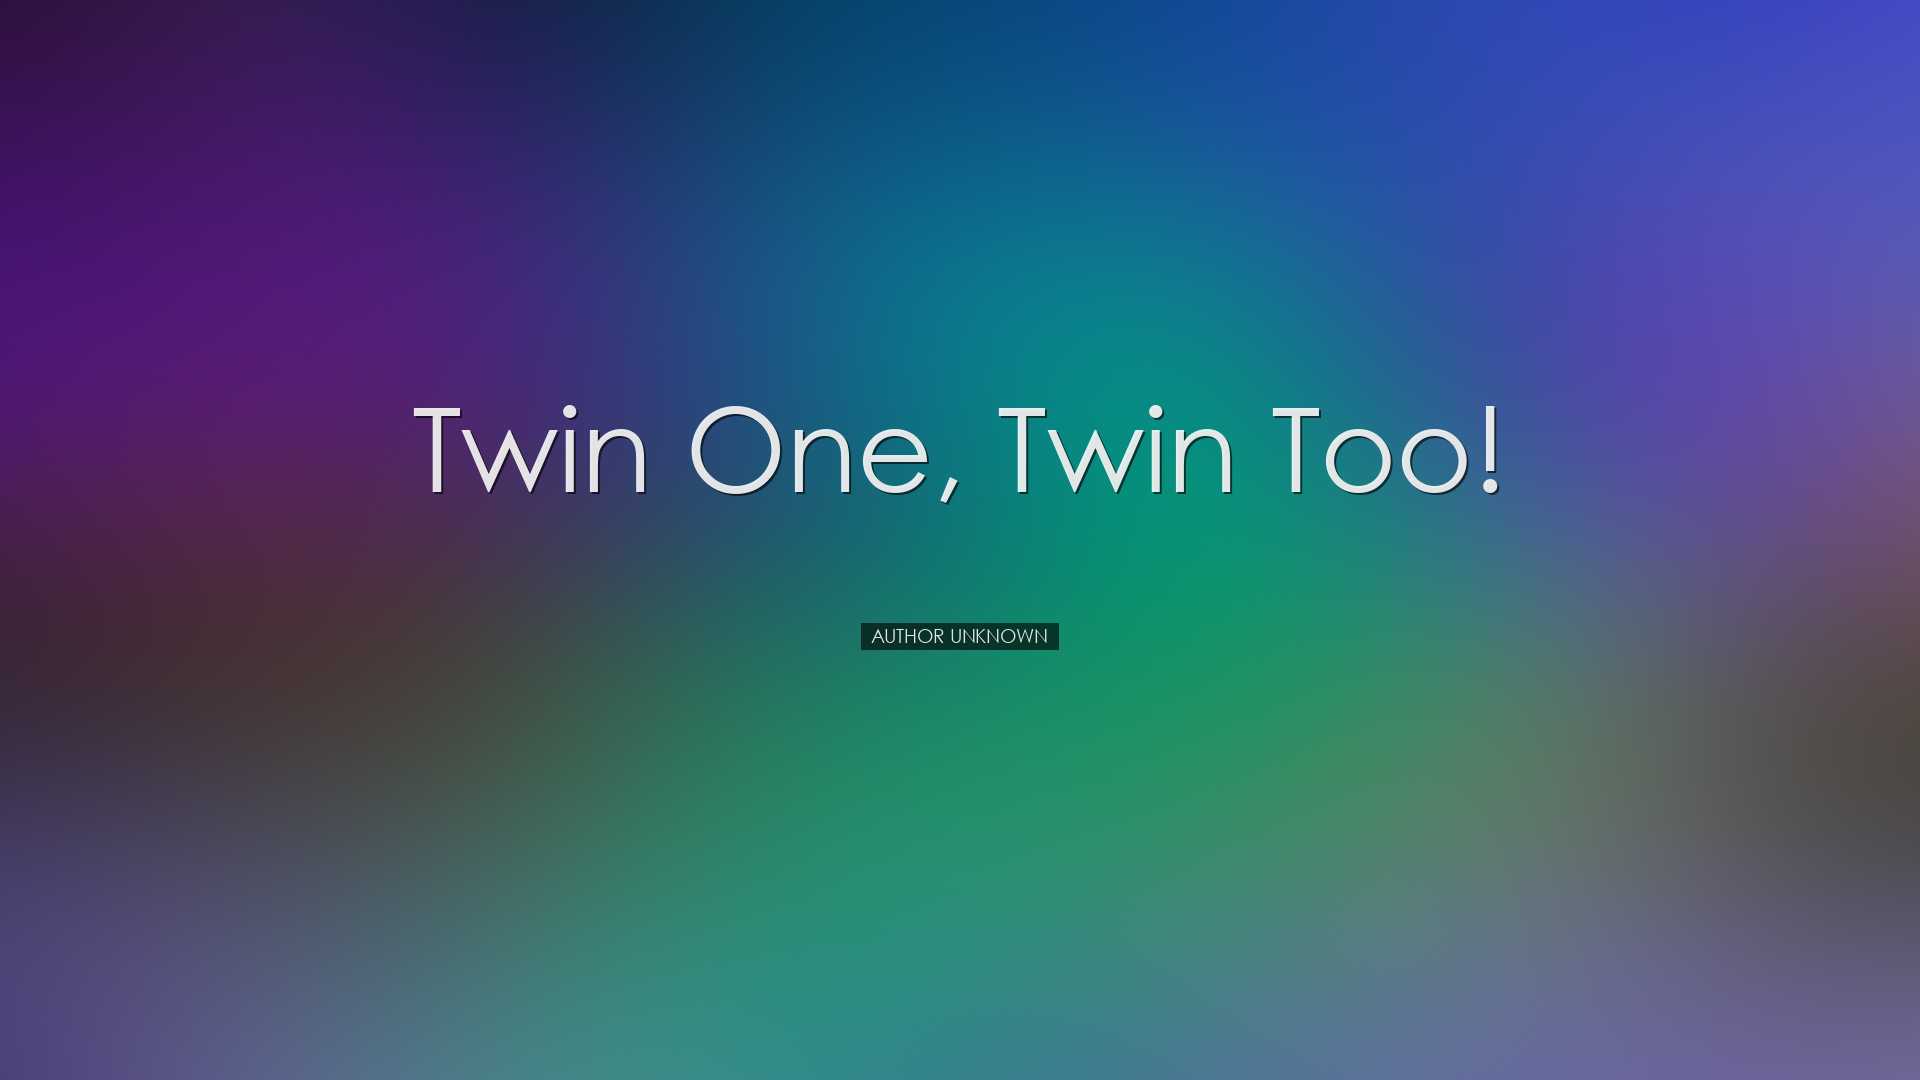 Twin one, twin too! - Author Unknown